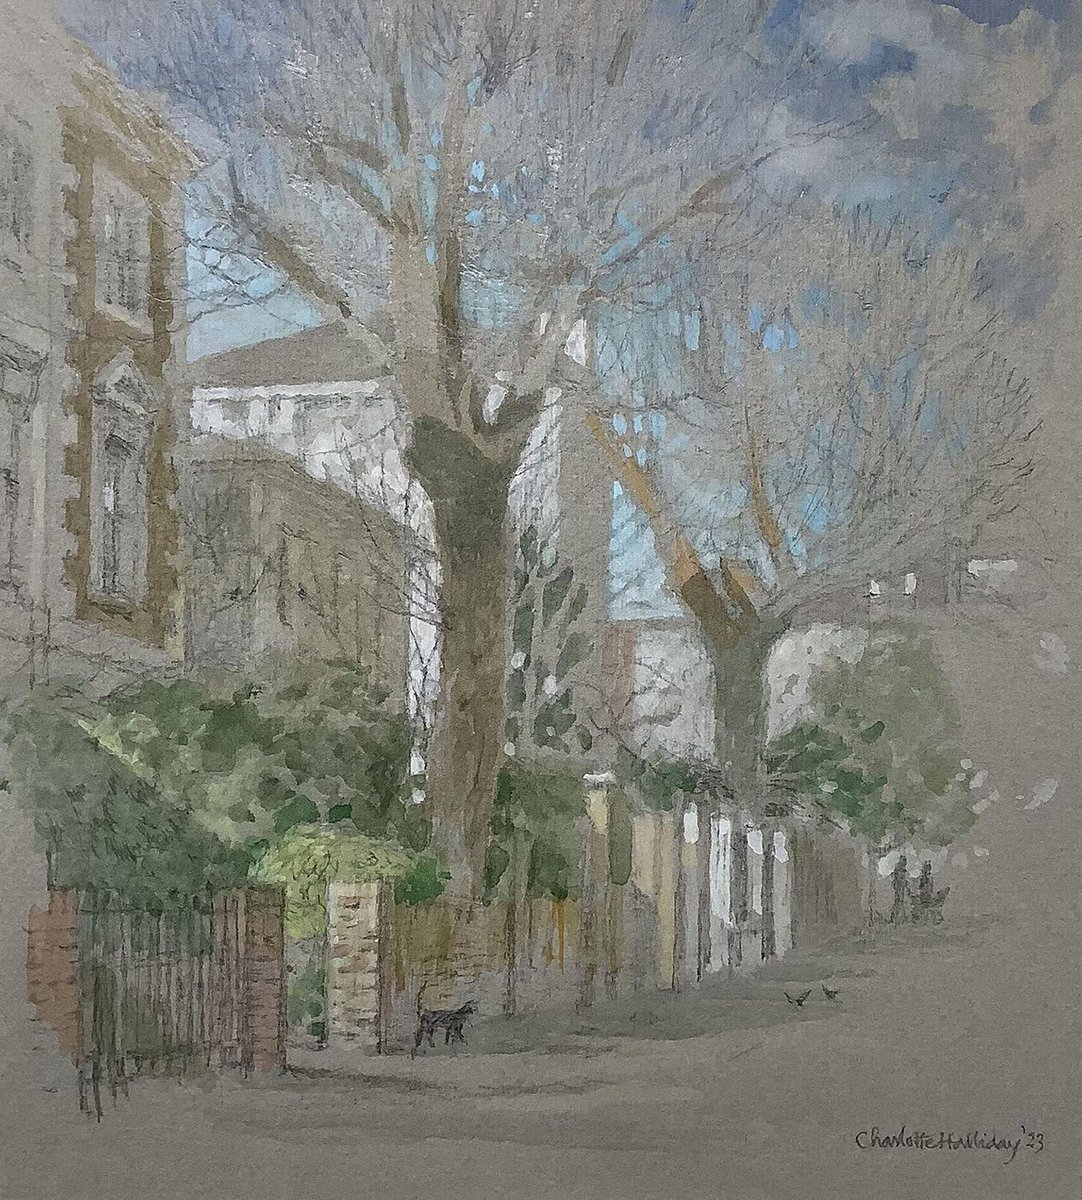 Townshend Road, Early Spring by Charlotte Halliday
Available to buy from our collection of works by #NEAC member #artists for under £1000: buff.ly/3wOdx3b
Search by subject, artist, medium or price. FREE UK P&P

#newenglishartclub #art #painting #supportartists #buyart